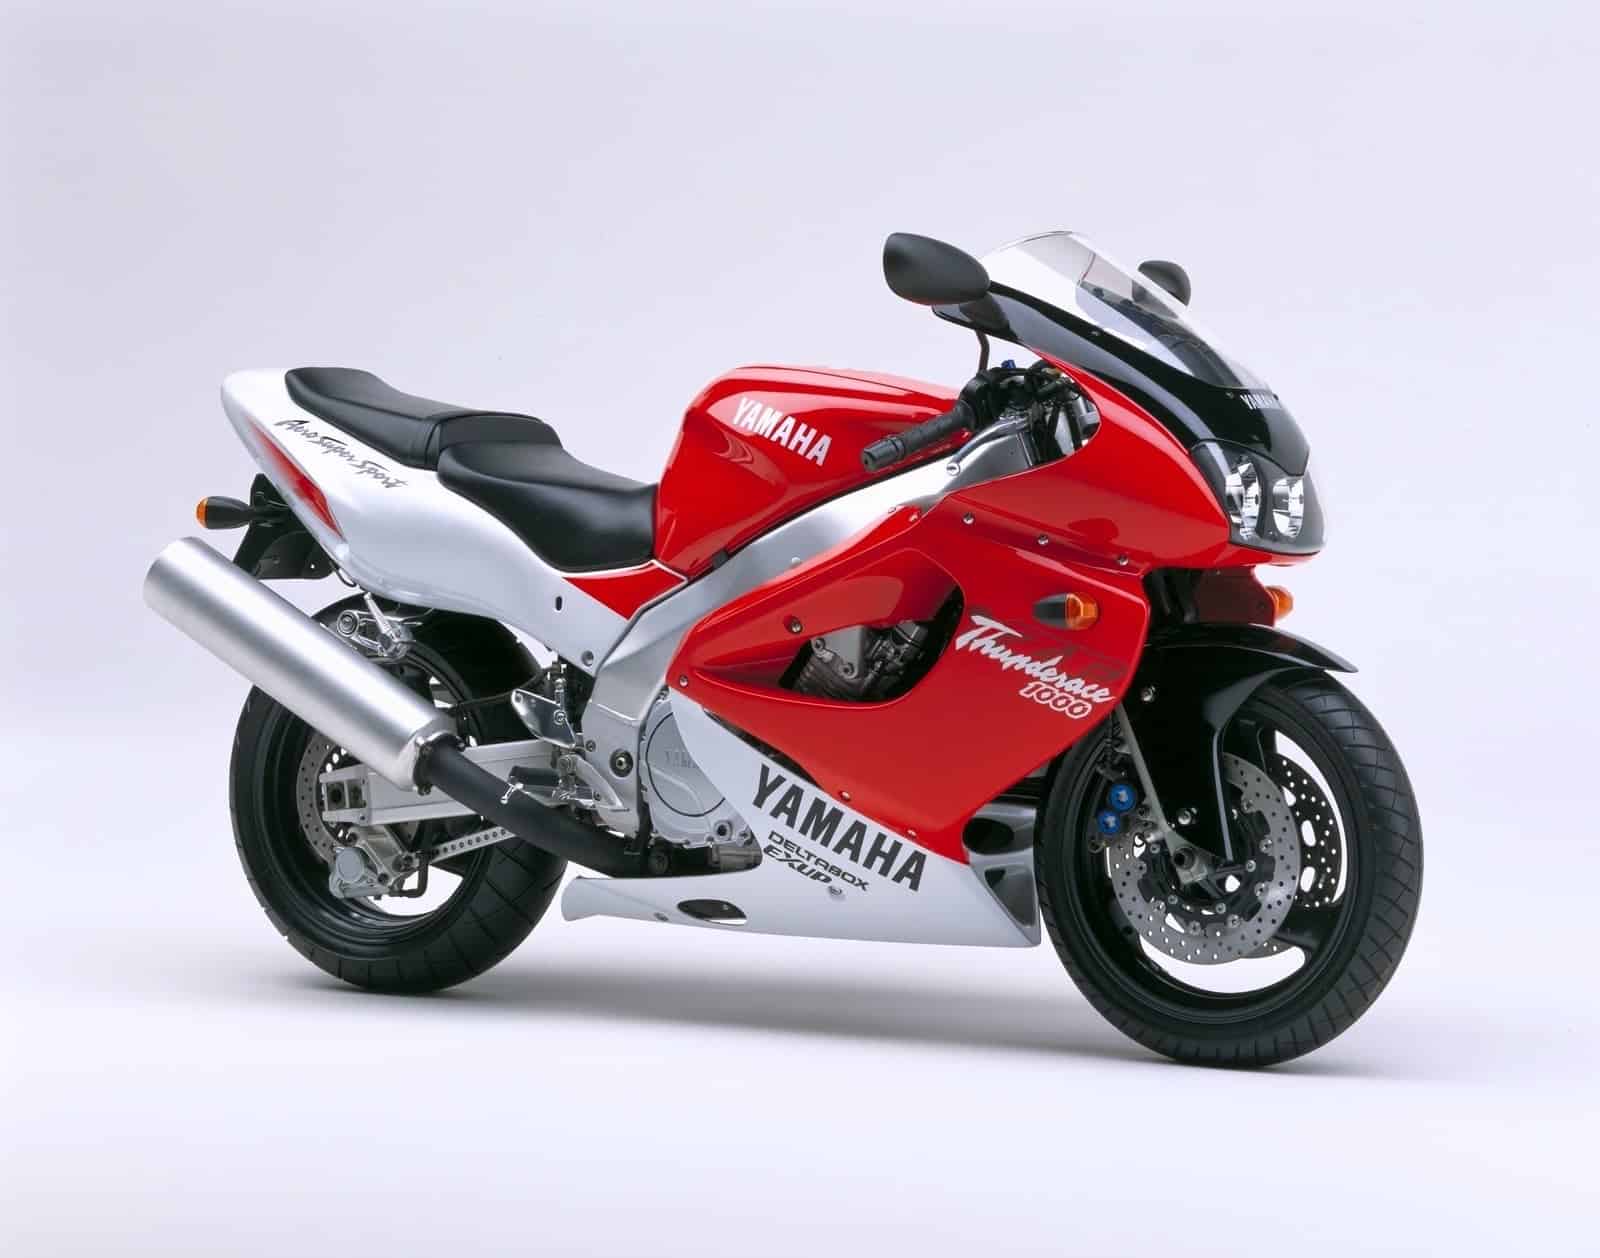 Yamaha YZF1000R Thunderace red and silver rhs 3-4 studio